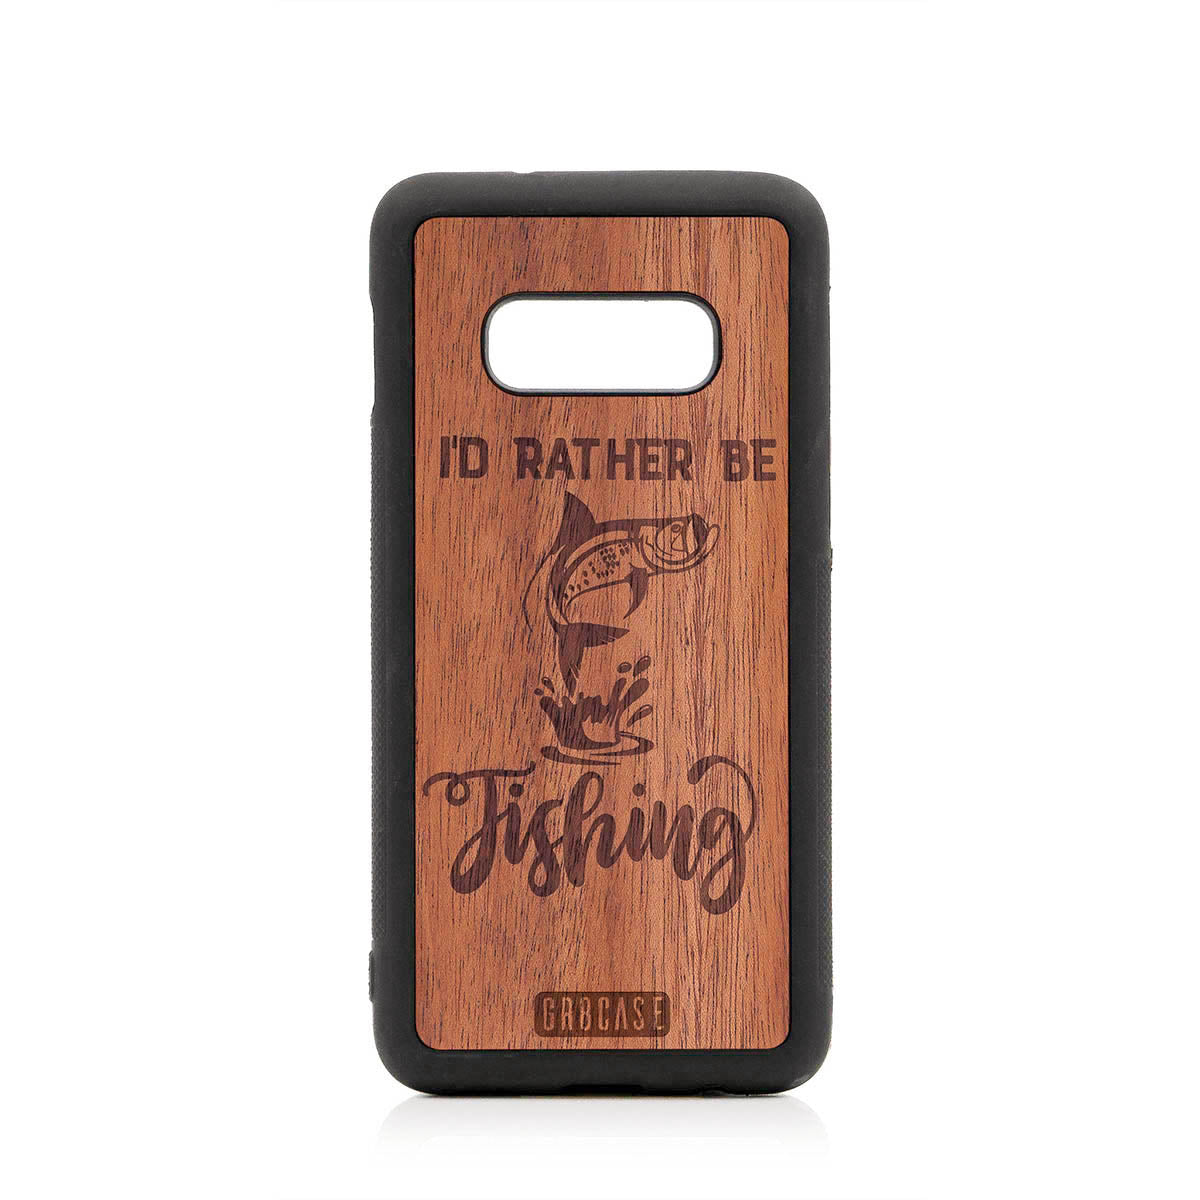 I'D Rather Be Fishing Design Wood Case For Samsung Galaxy S10E